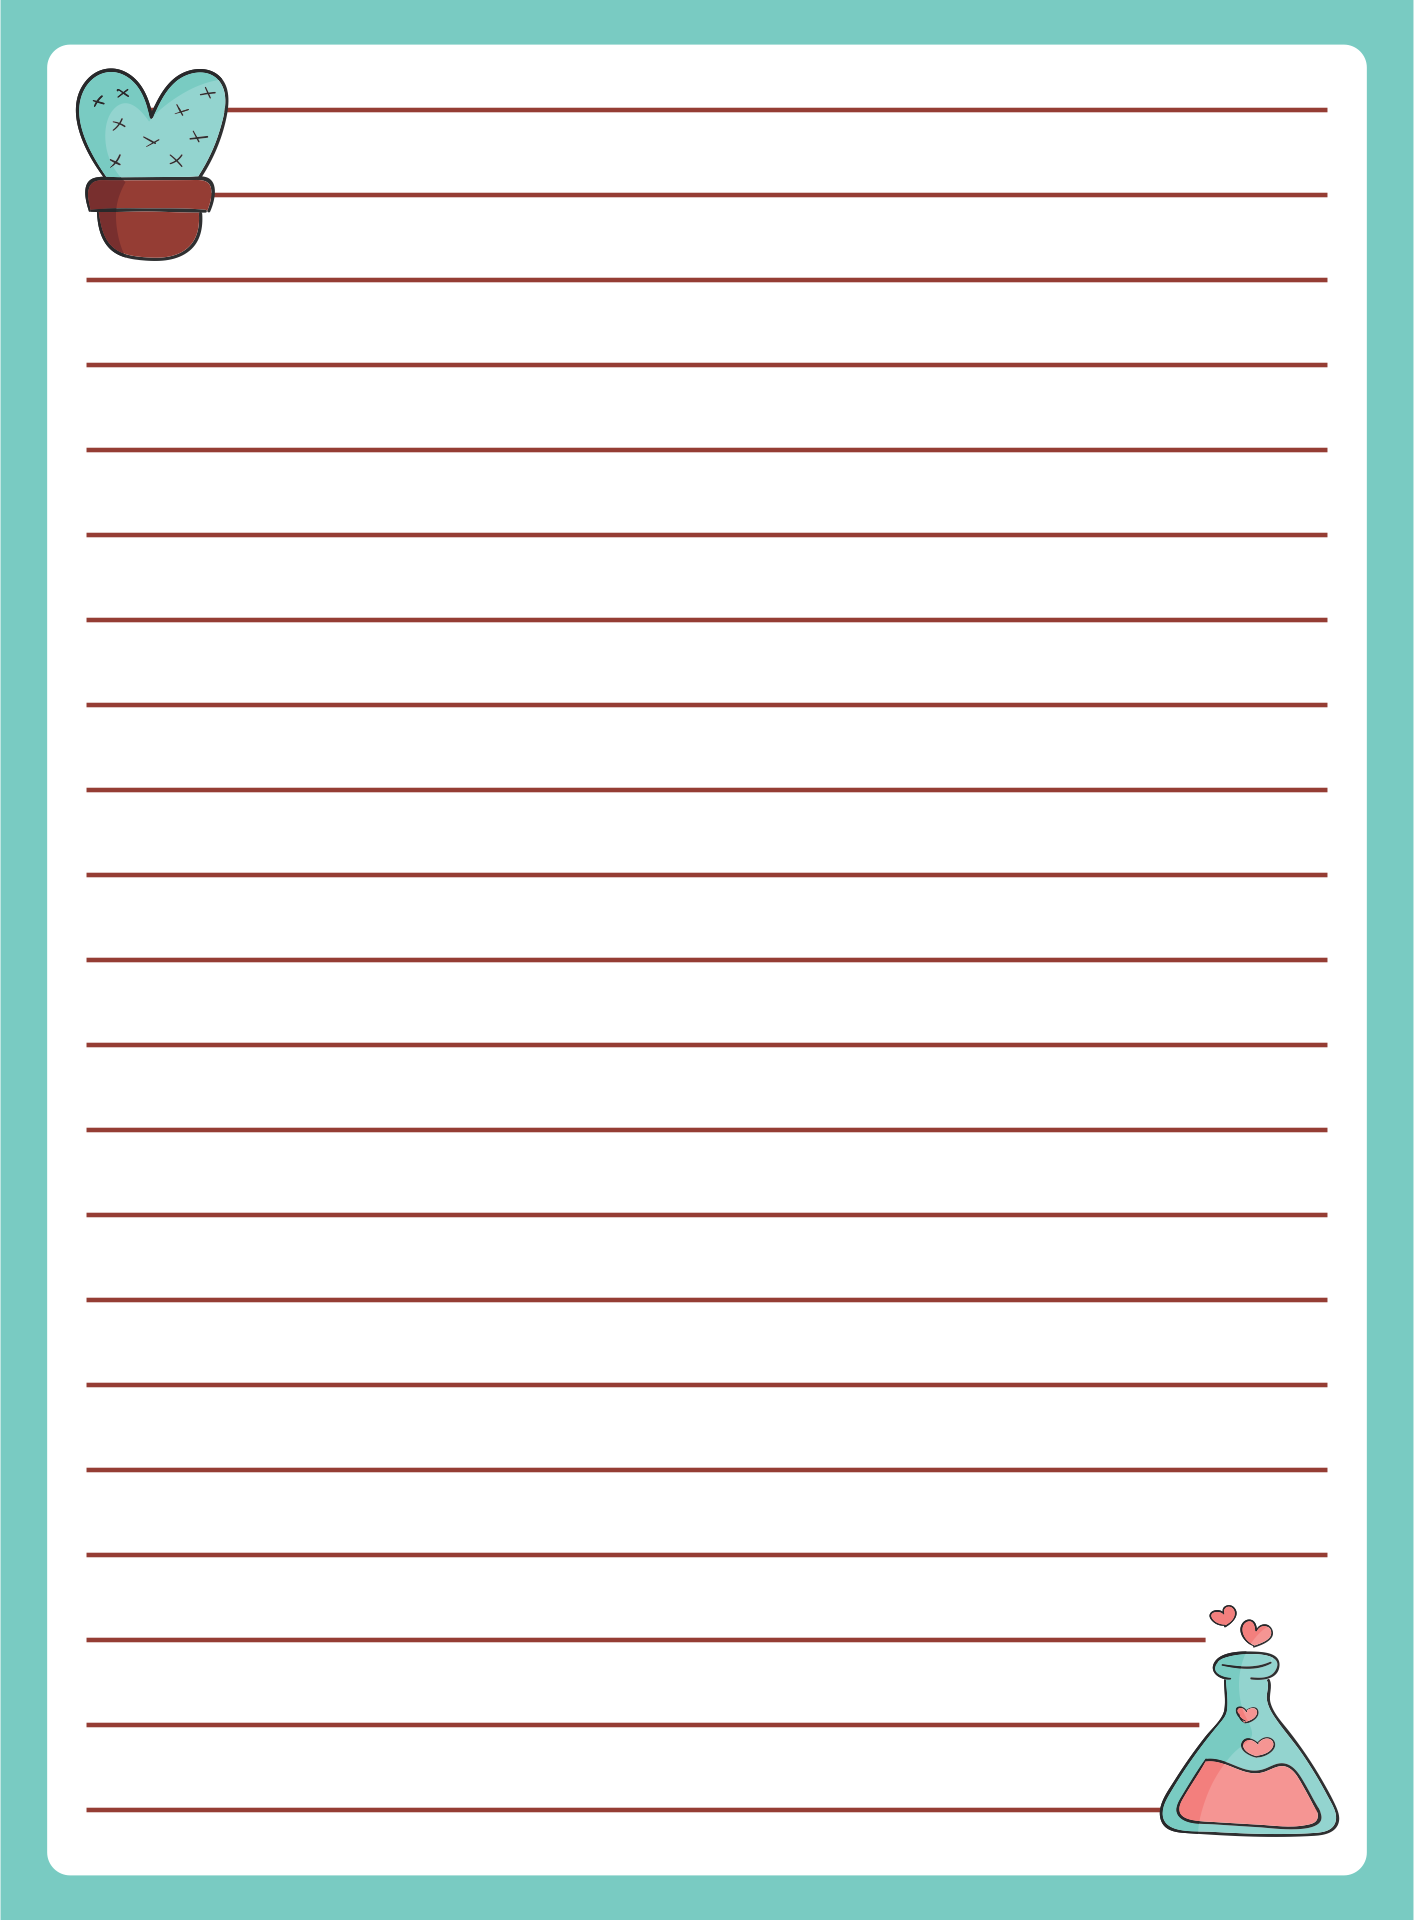 Printable Stationery Paper with Lines